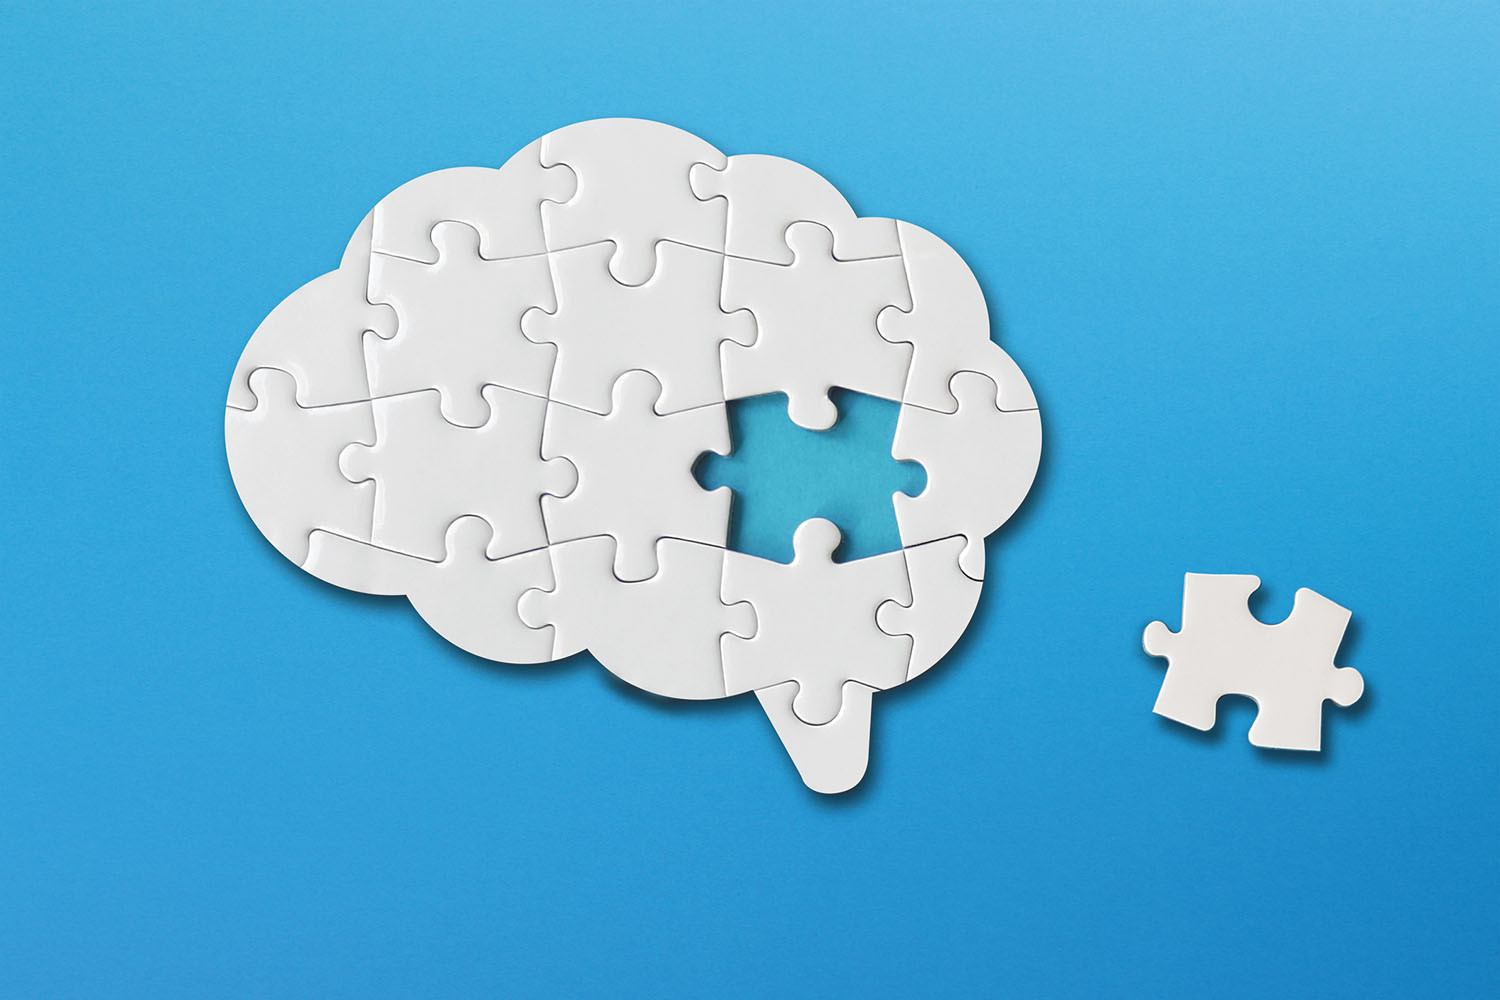 illustration of a puzzle in the shape of a brain with one piece removed and set to the side, all against a blue background